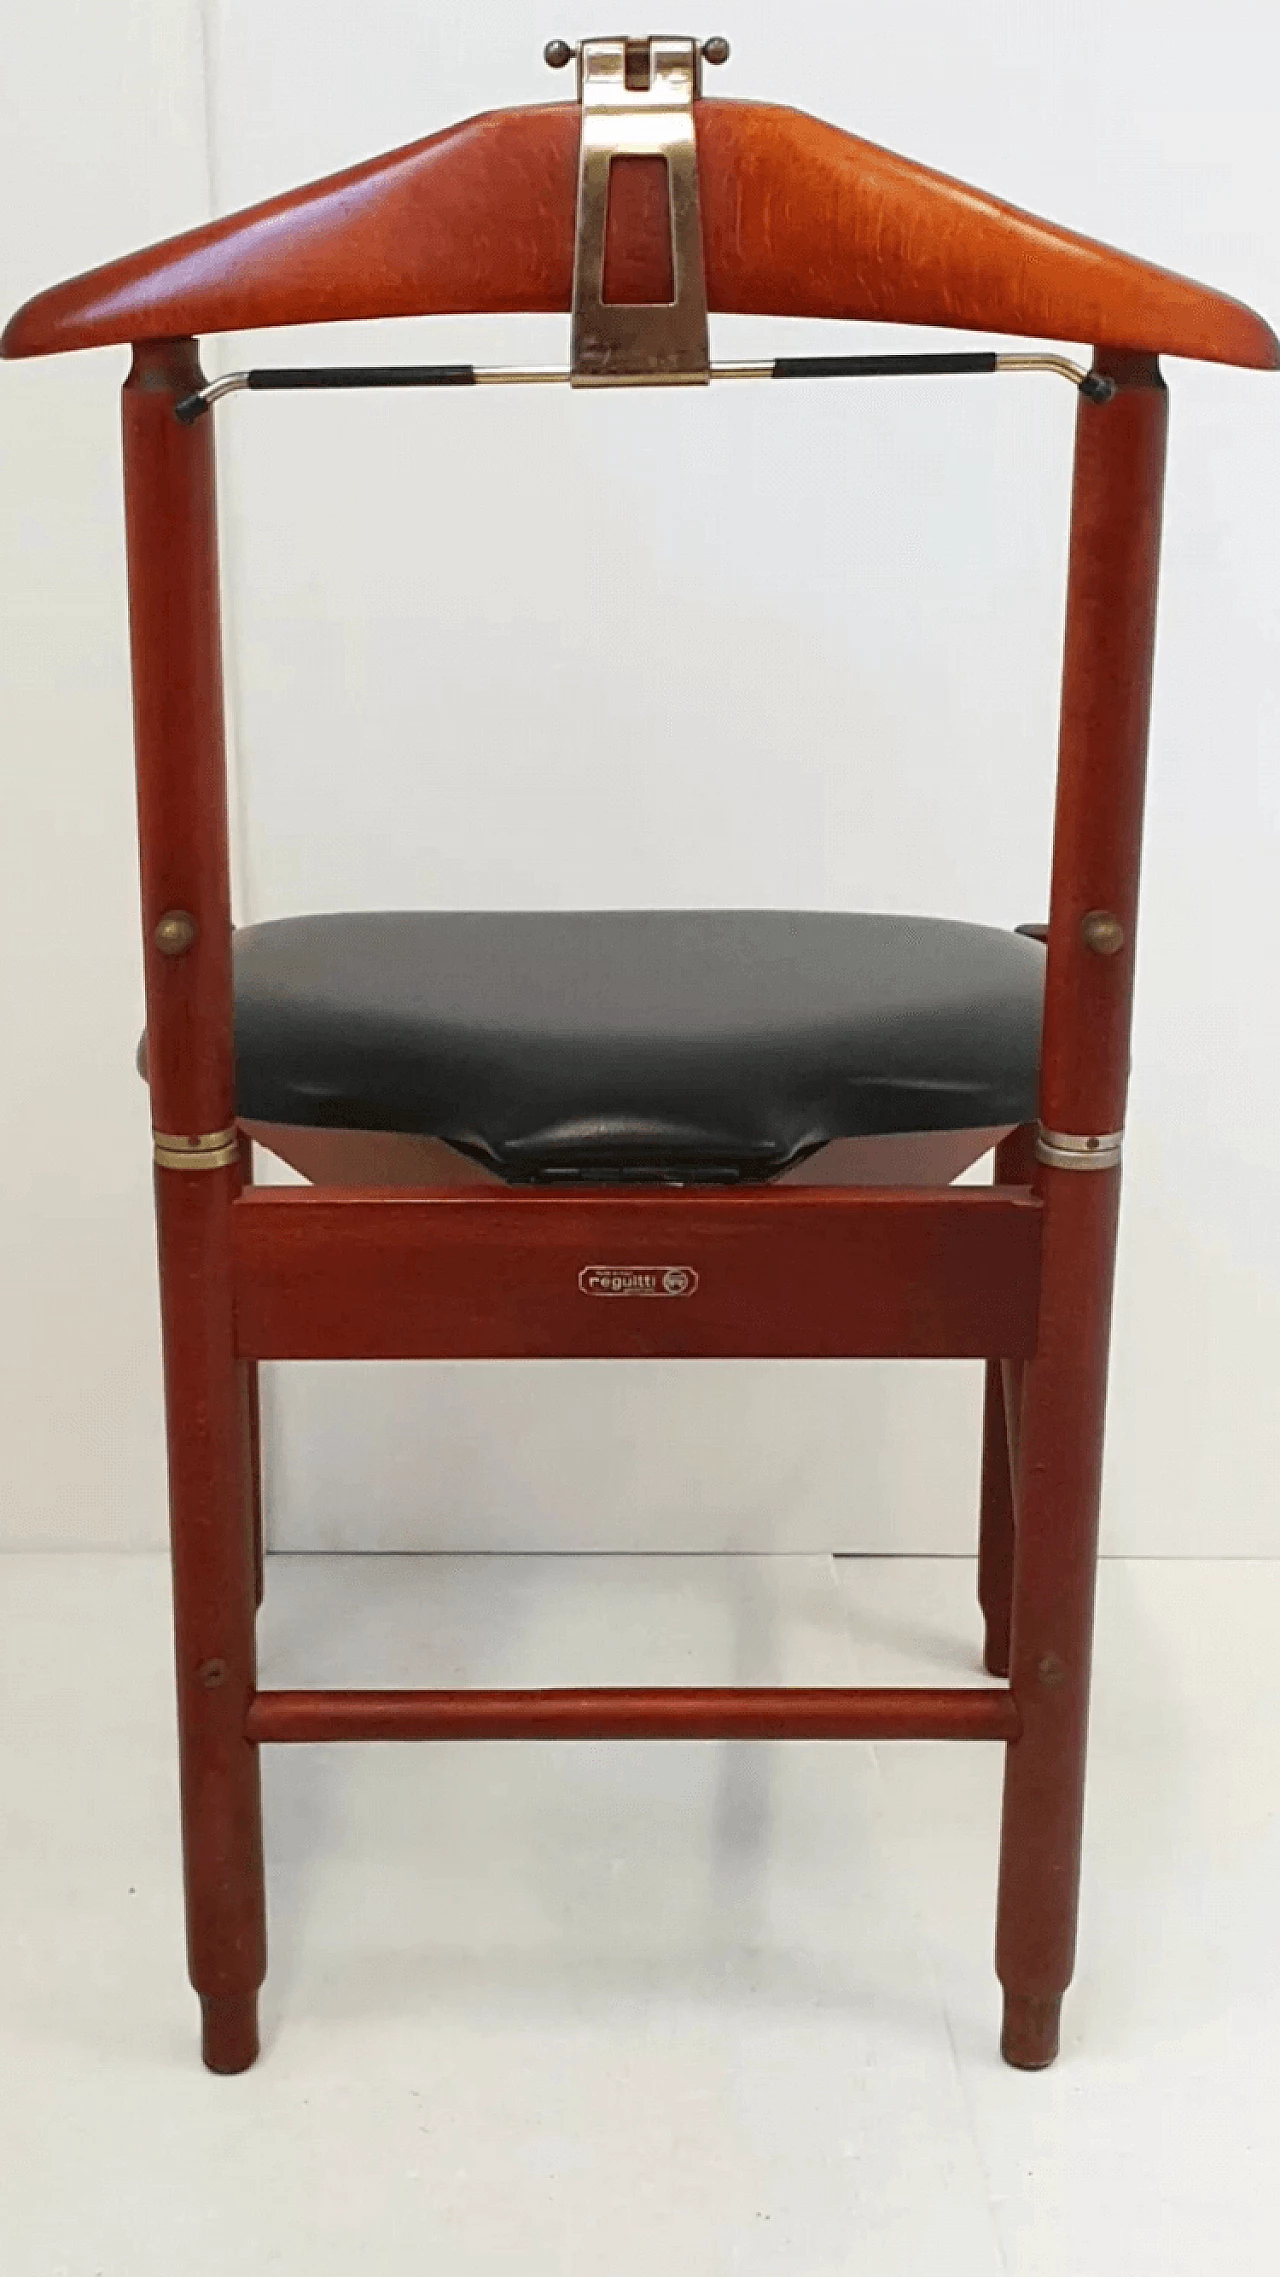 Chair with Servomuto by the Reguitti brothers 1137766